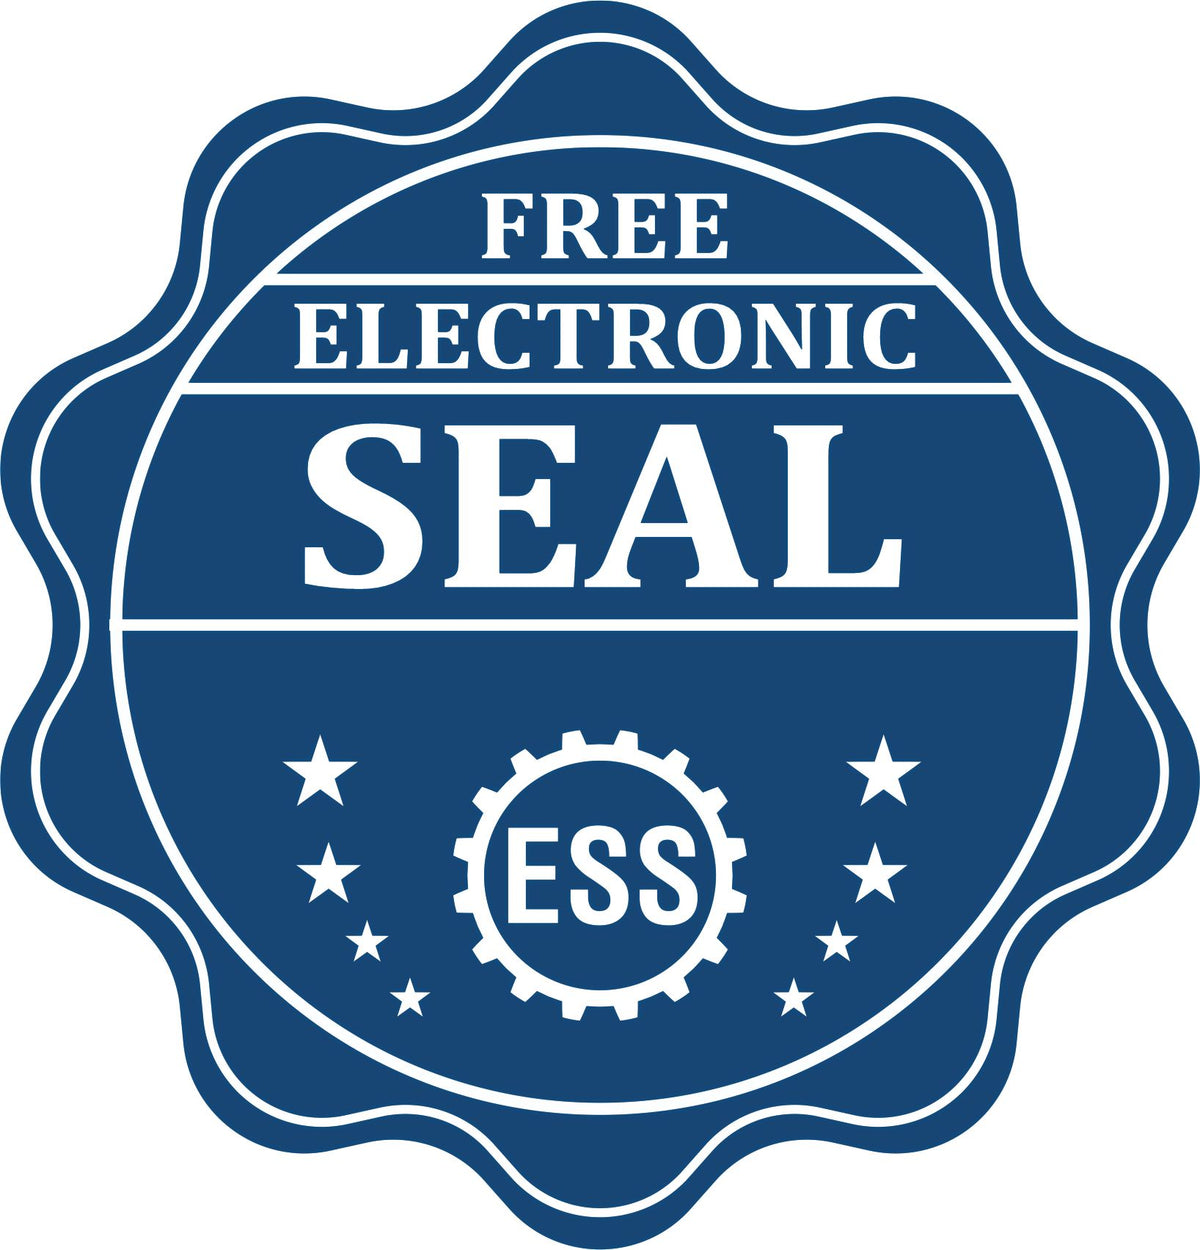 A badge showing a free electronic seal for the Heavy Duty Cast Iron Mississippi Engineer Seal Embosser with stars and the ESS gear on the emblem.